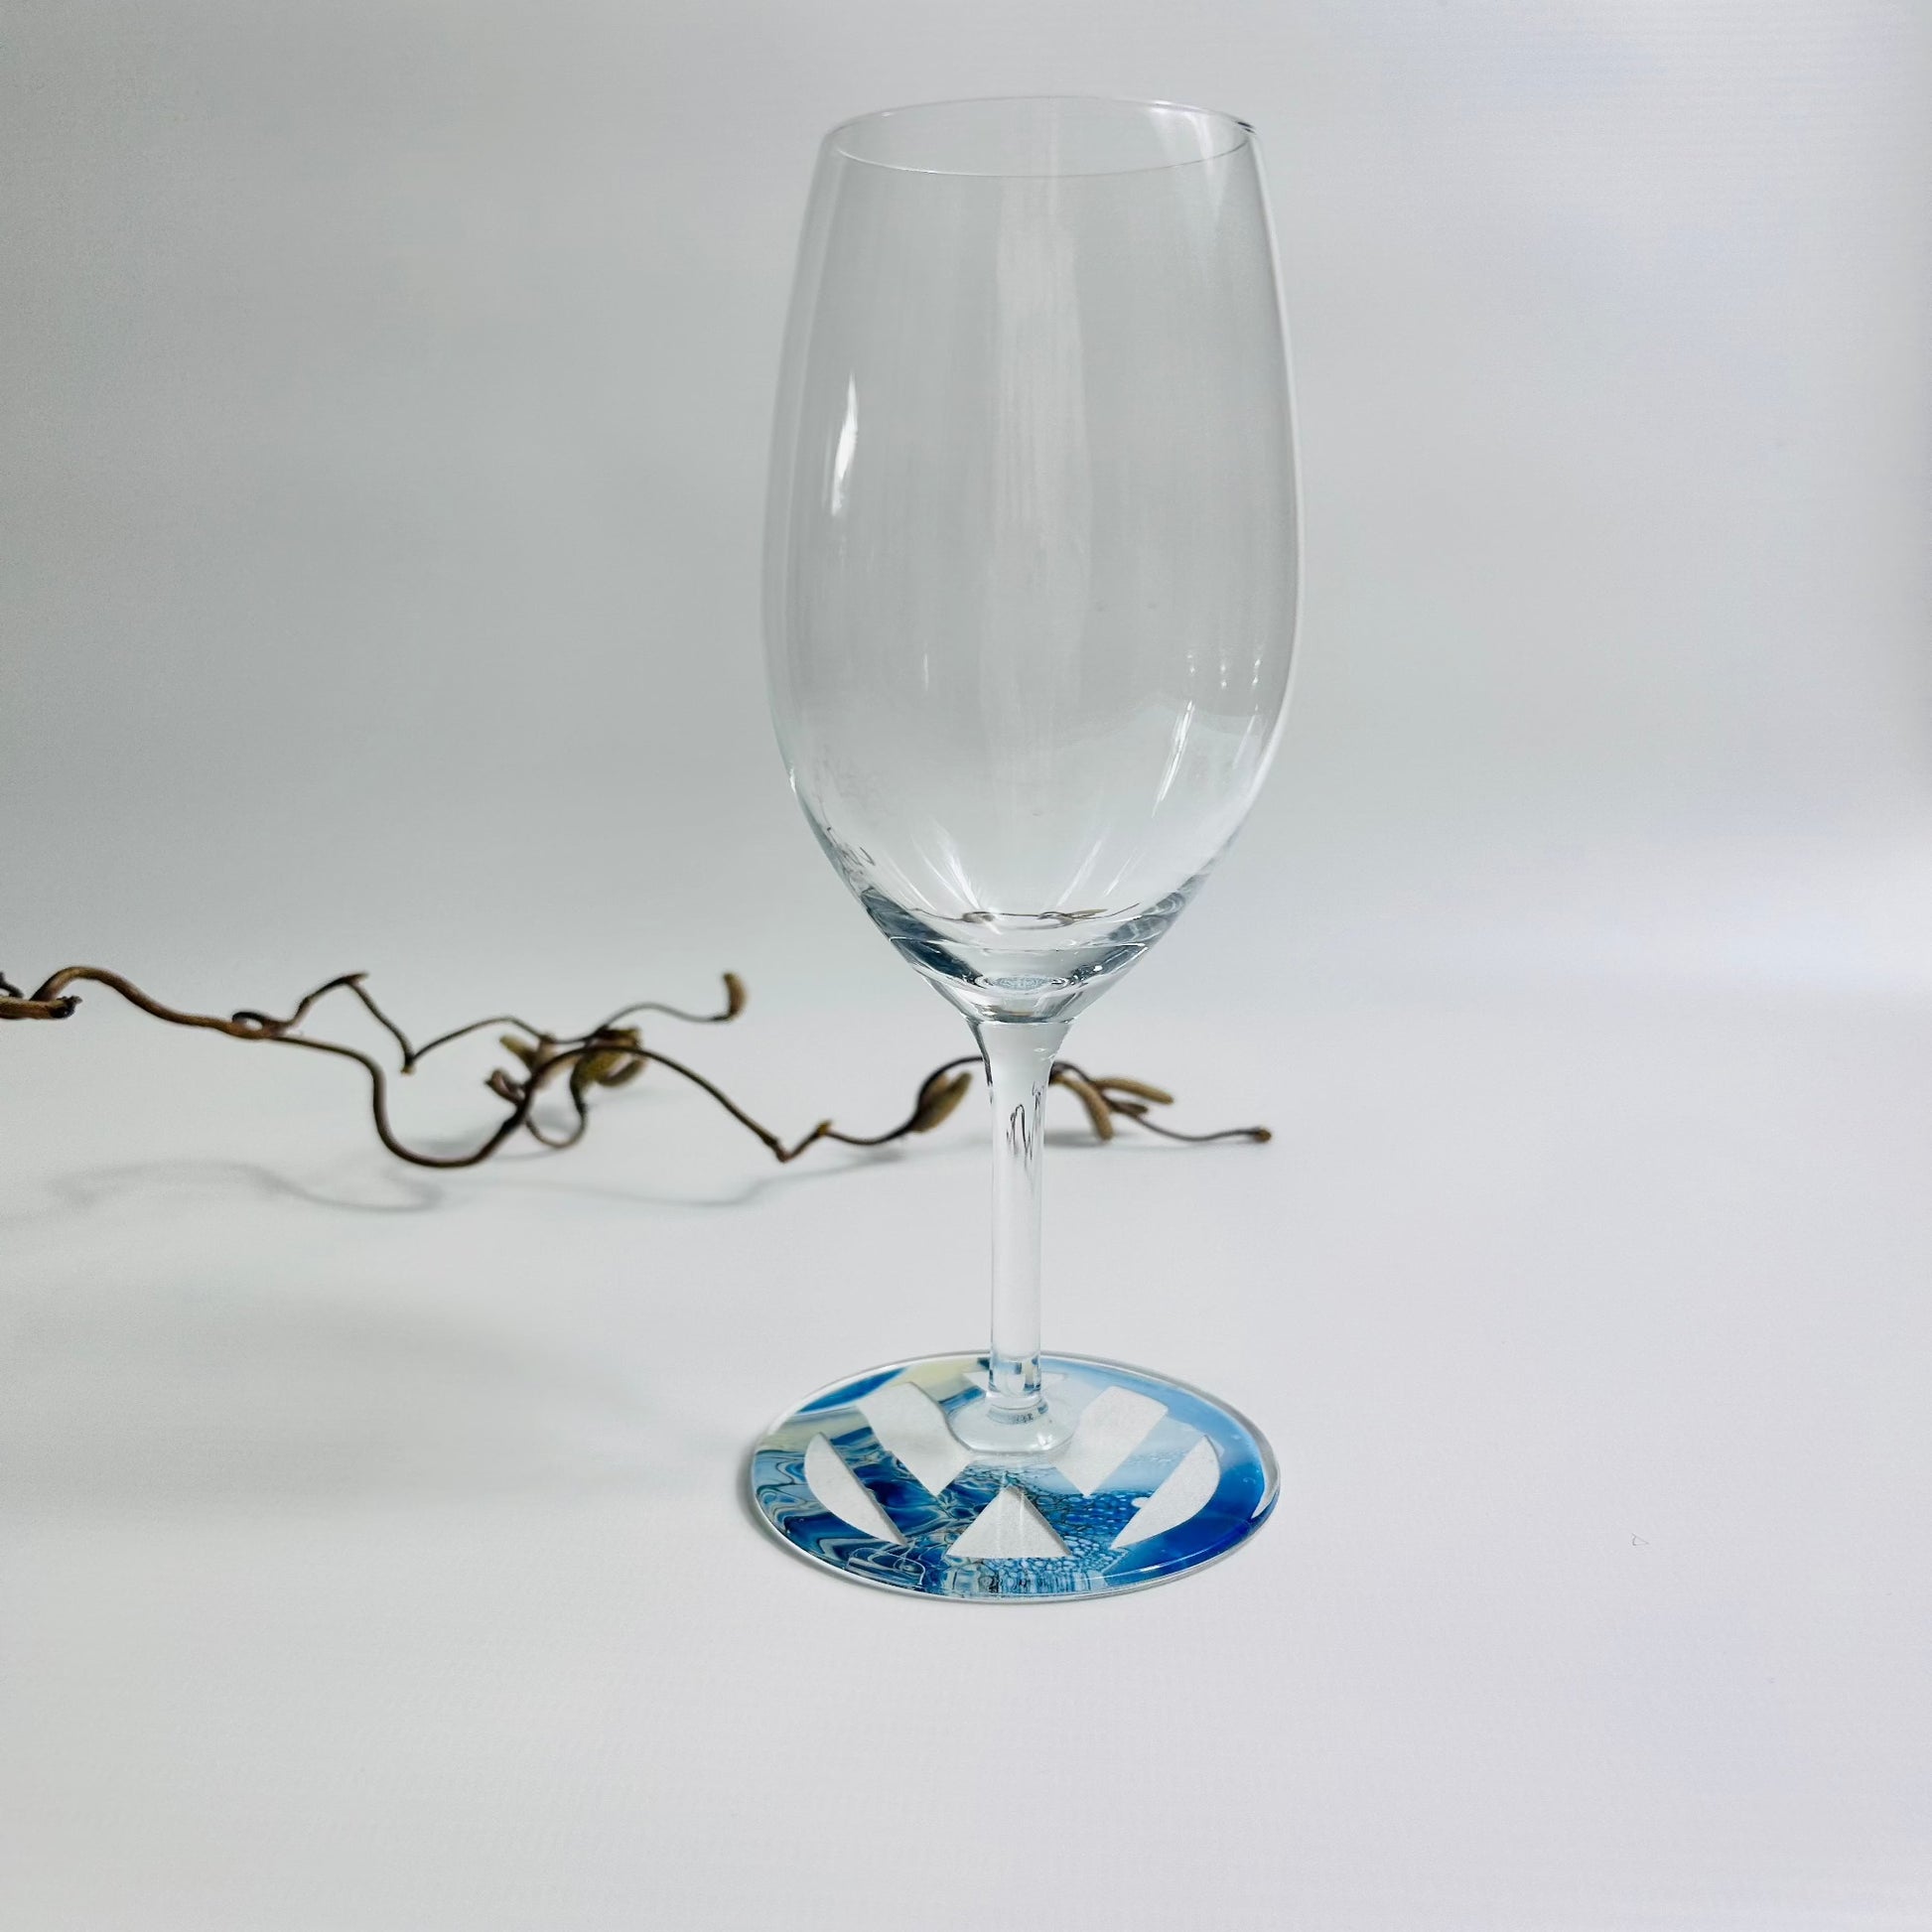 Prosecco glass with blue fluid art logo on the base, sealed in resin